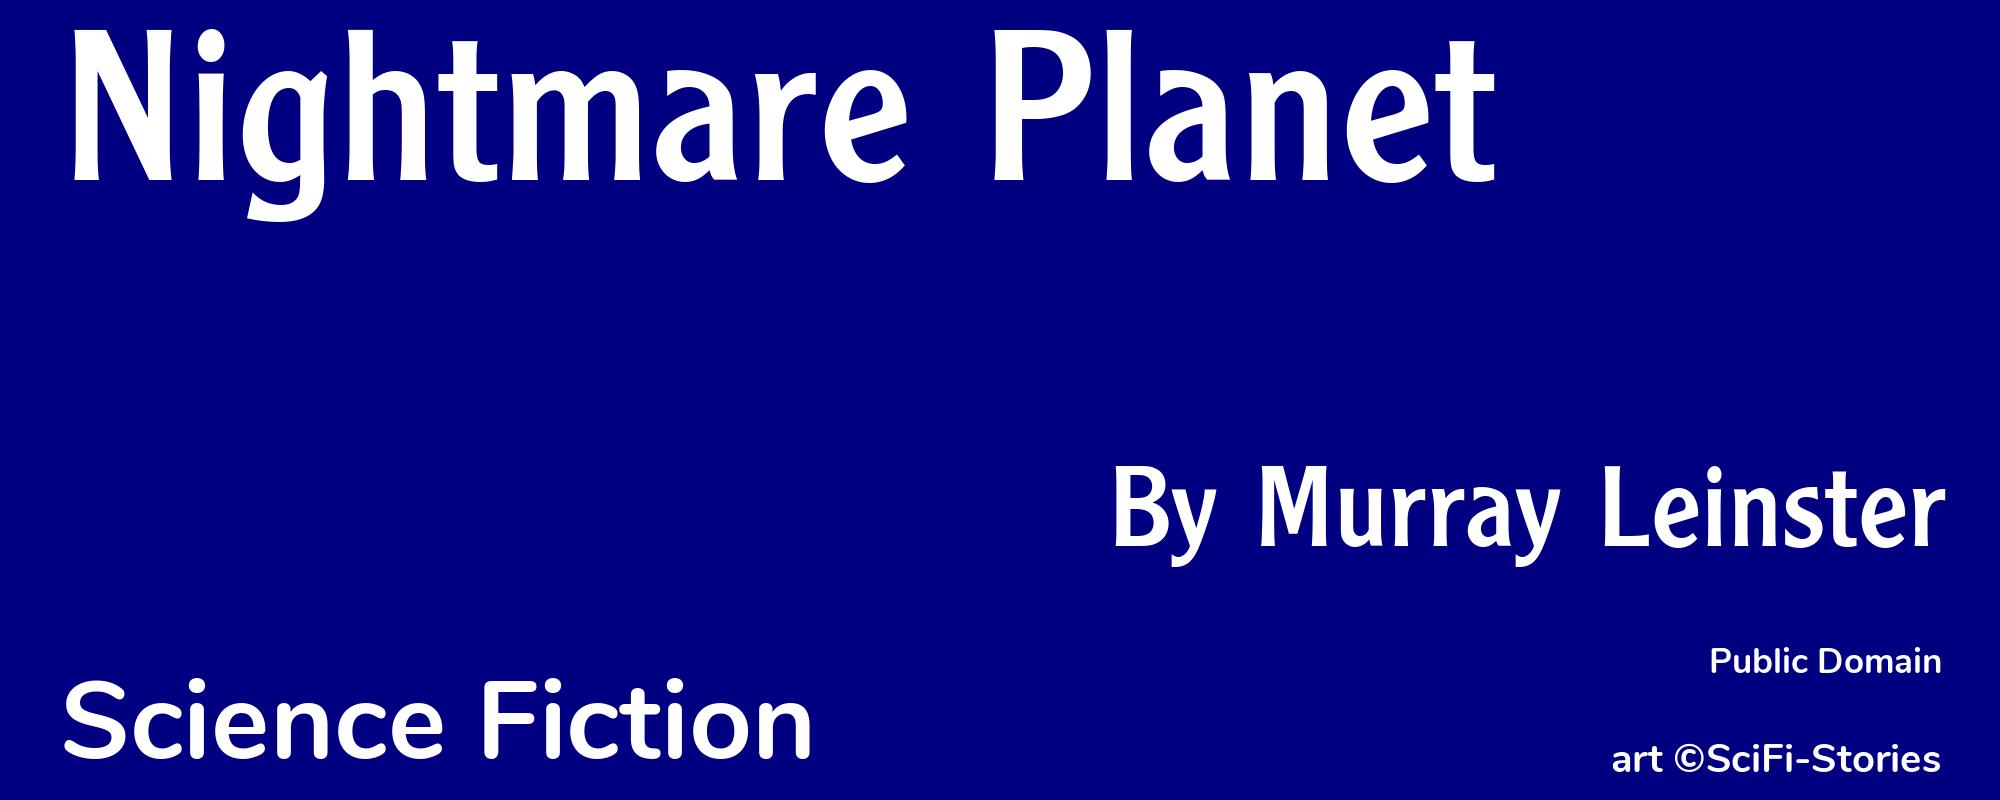 Nightmare Planet - Cover